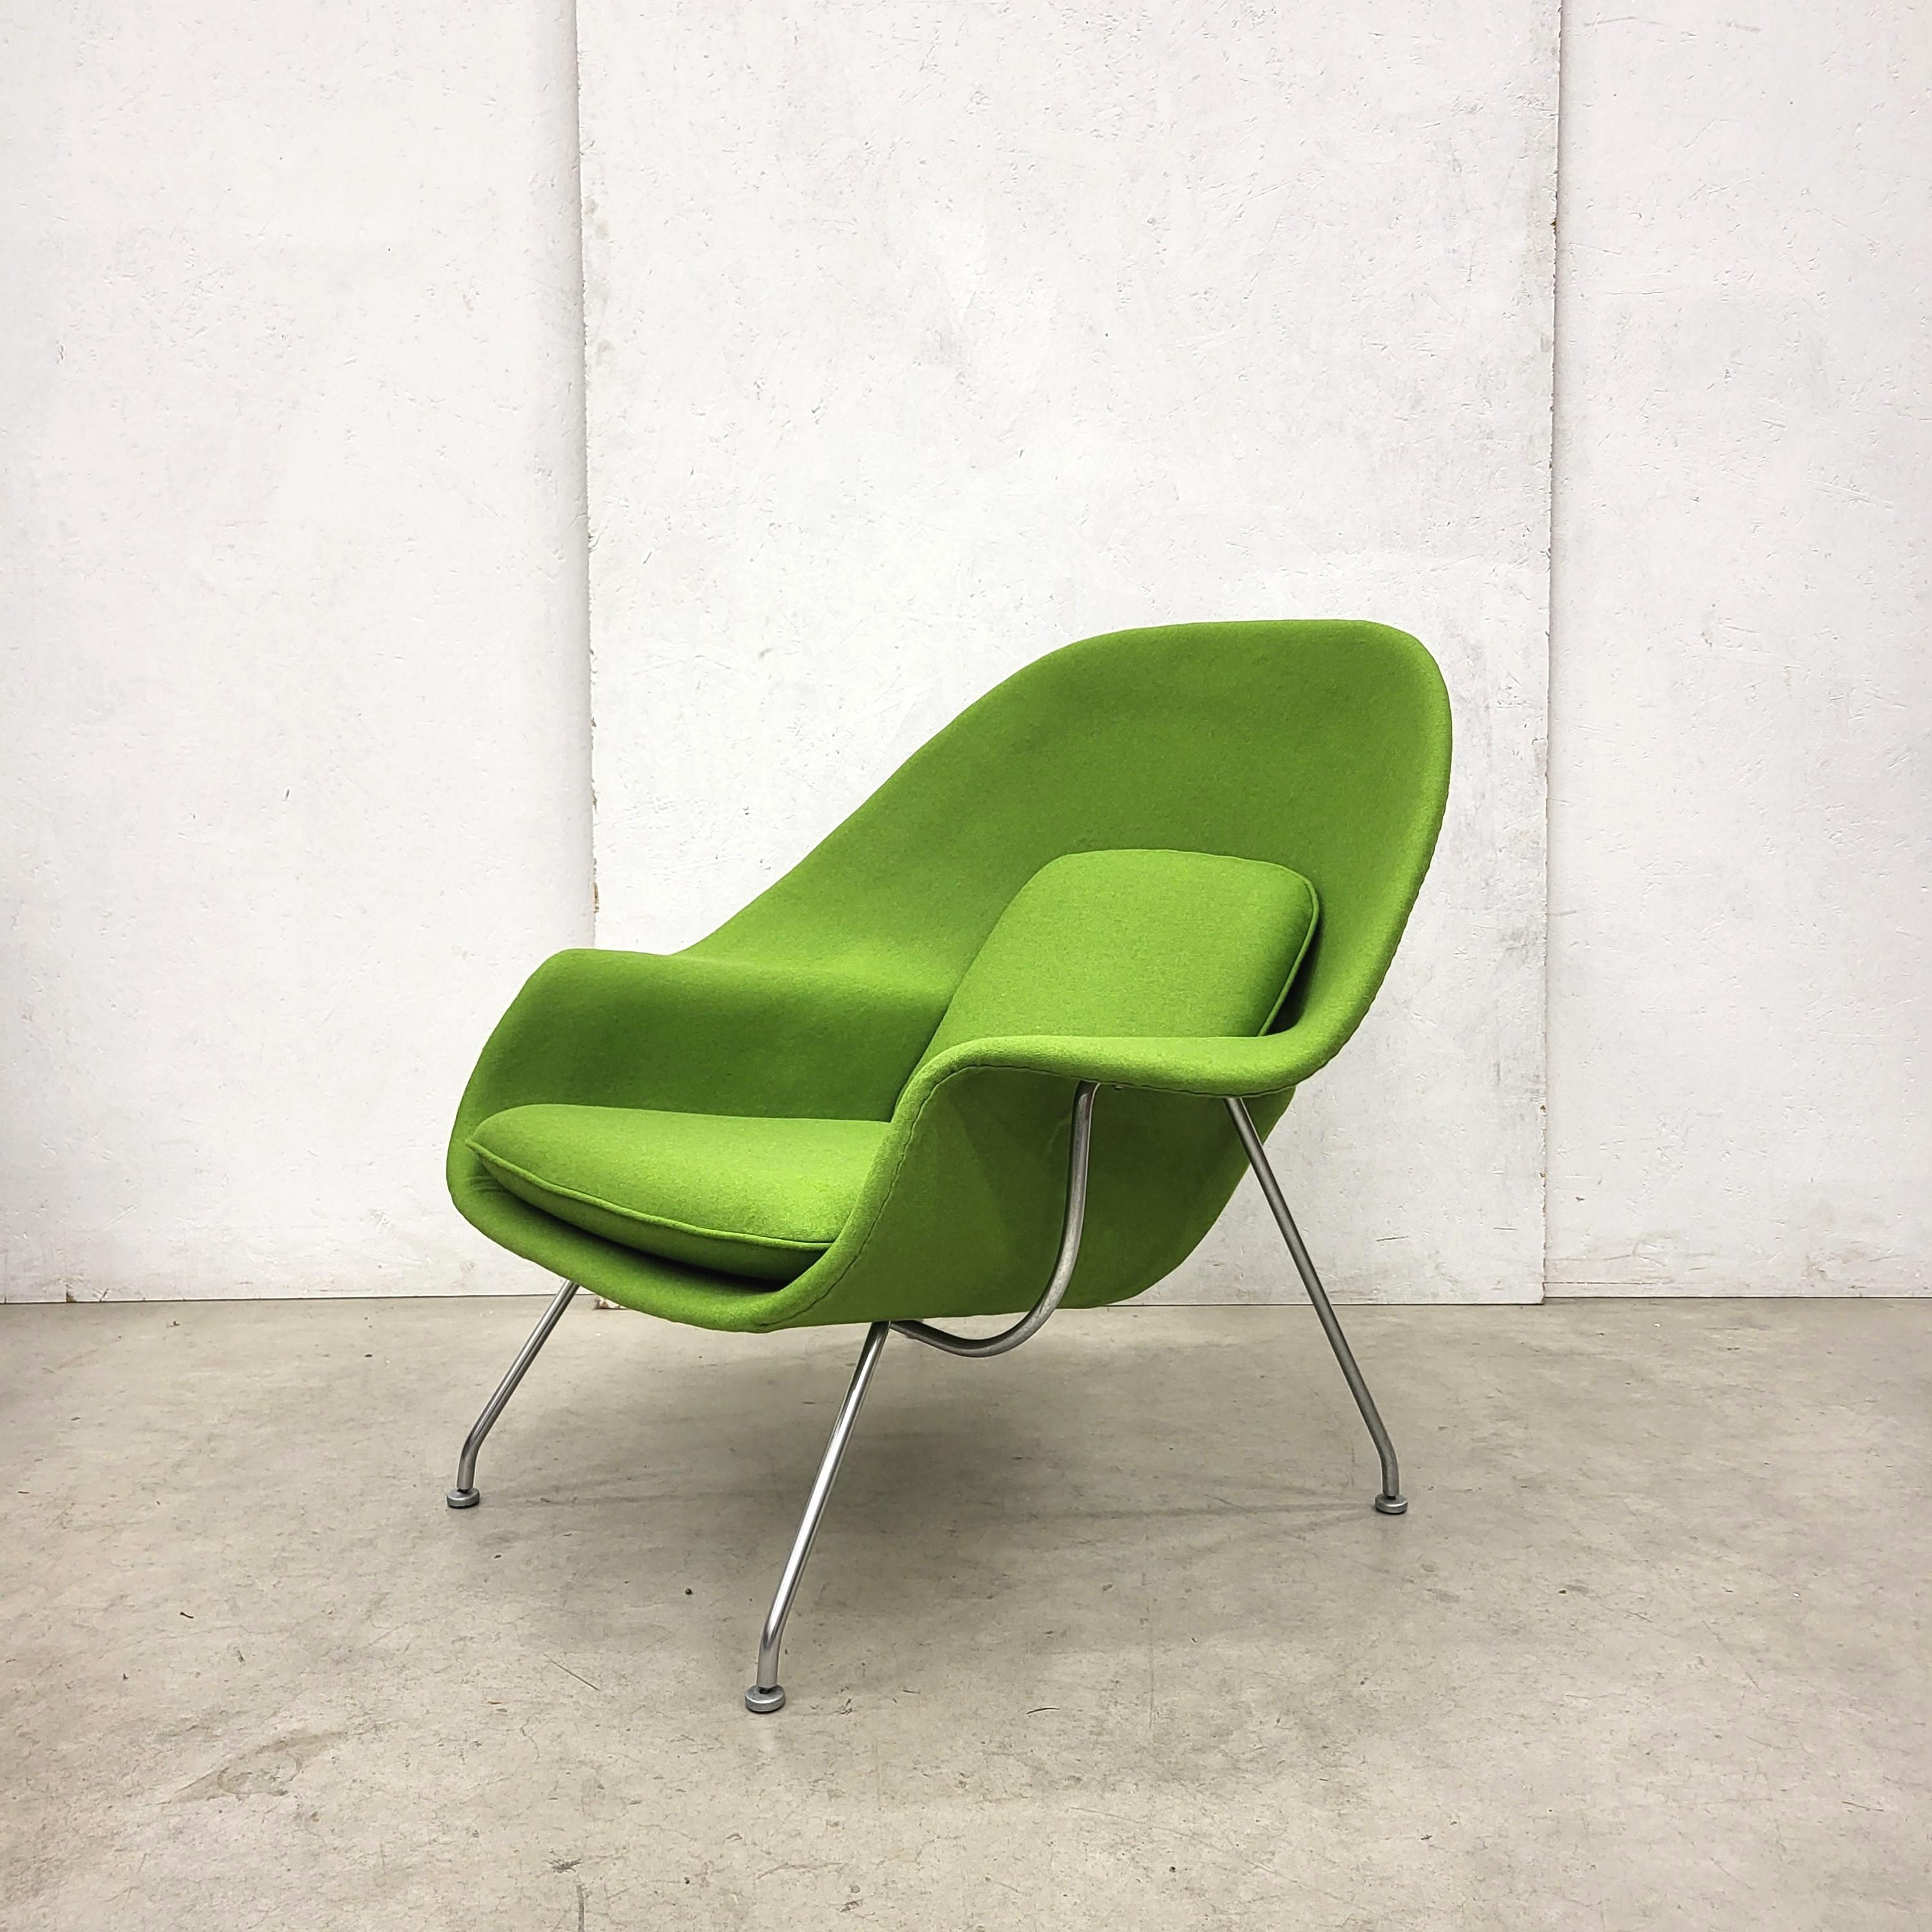 Hand-Crafted Woodgreen Womb Chair & Ottoman by Eero Saarinen for Knoll, 1960s